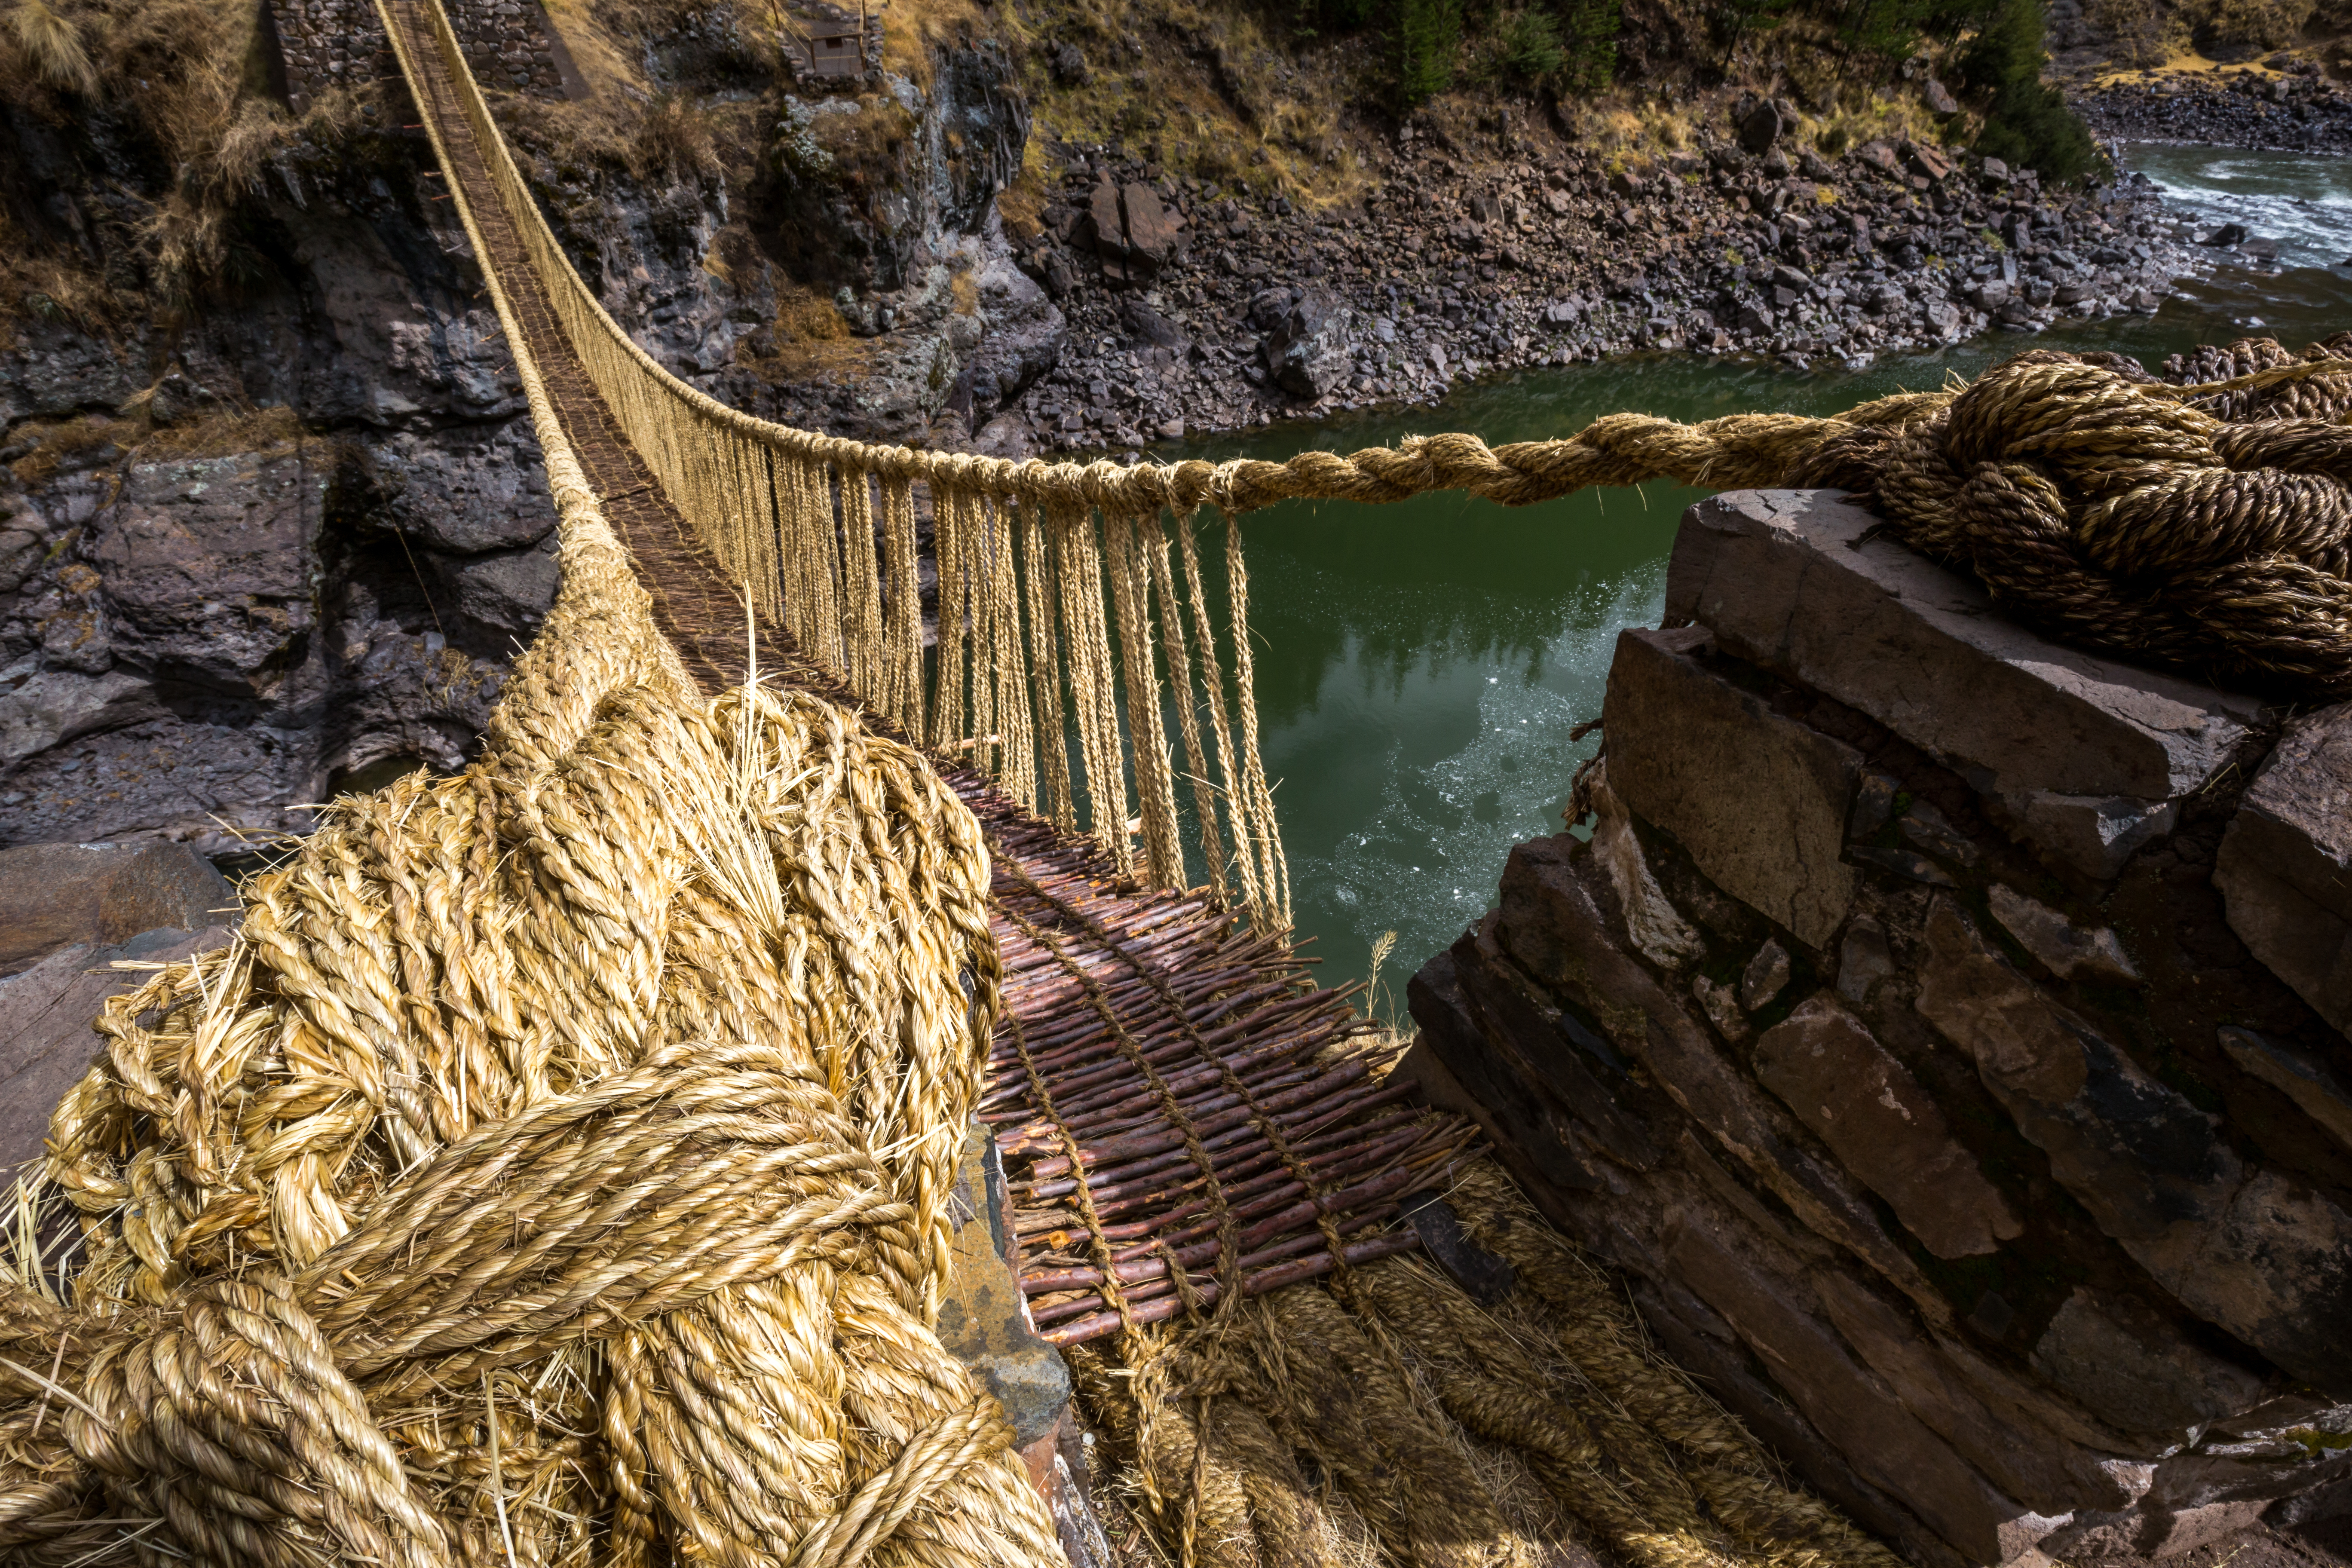 View from one end of a bridge made of rope and sticks, crossing a ravine with water at the bottom.